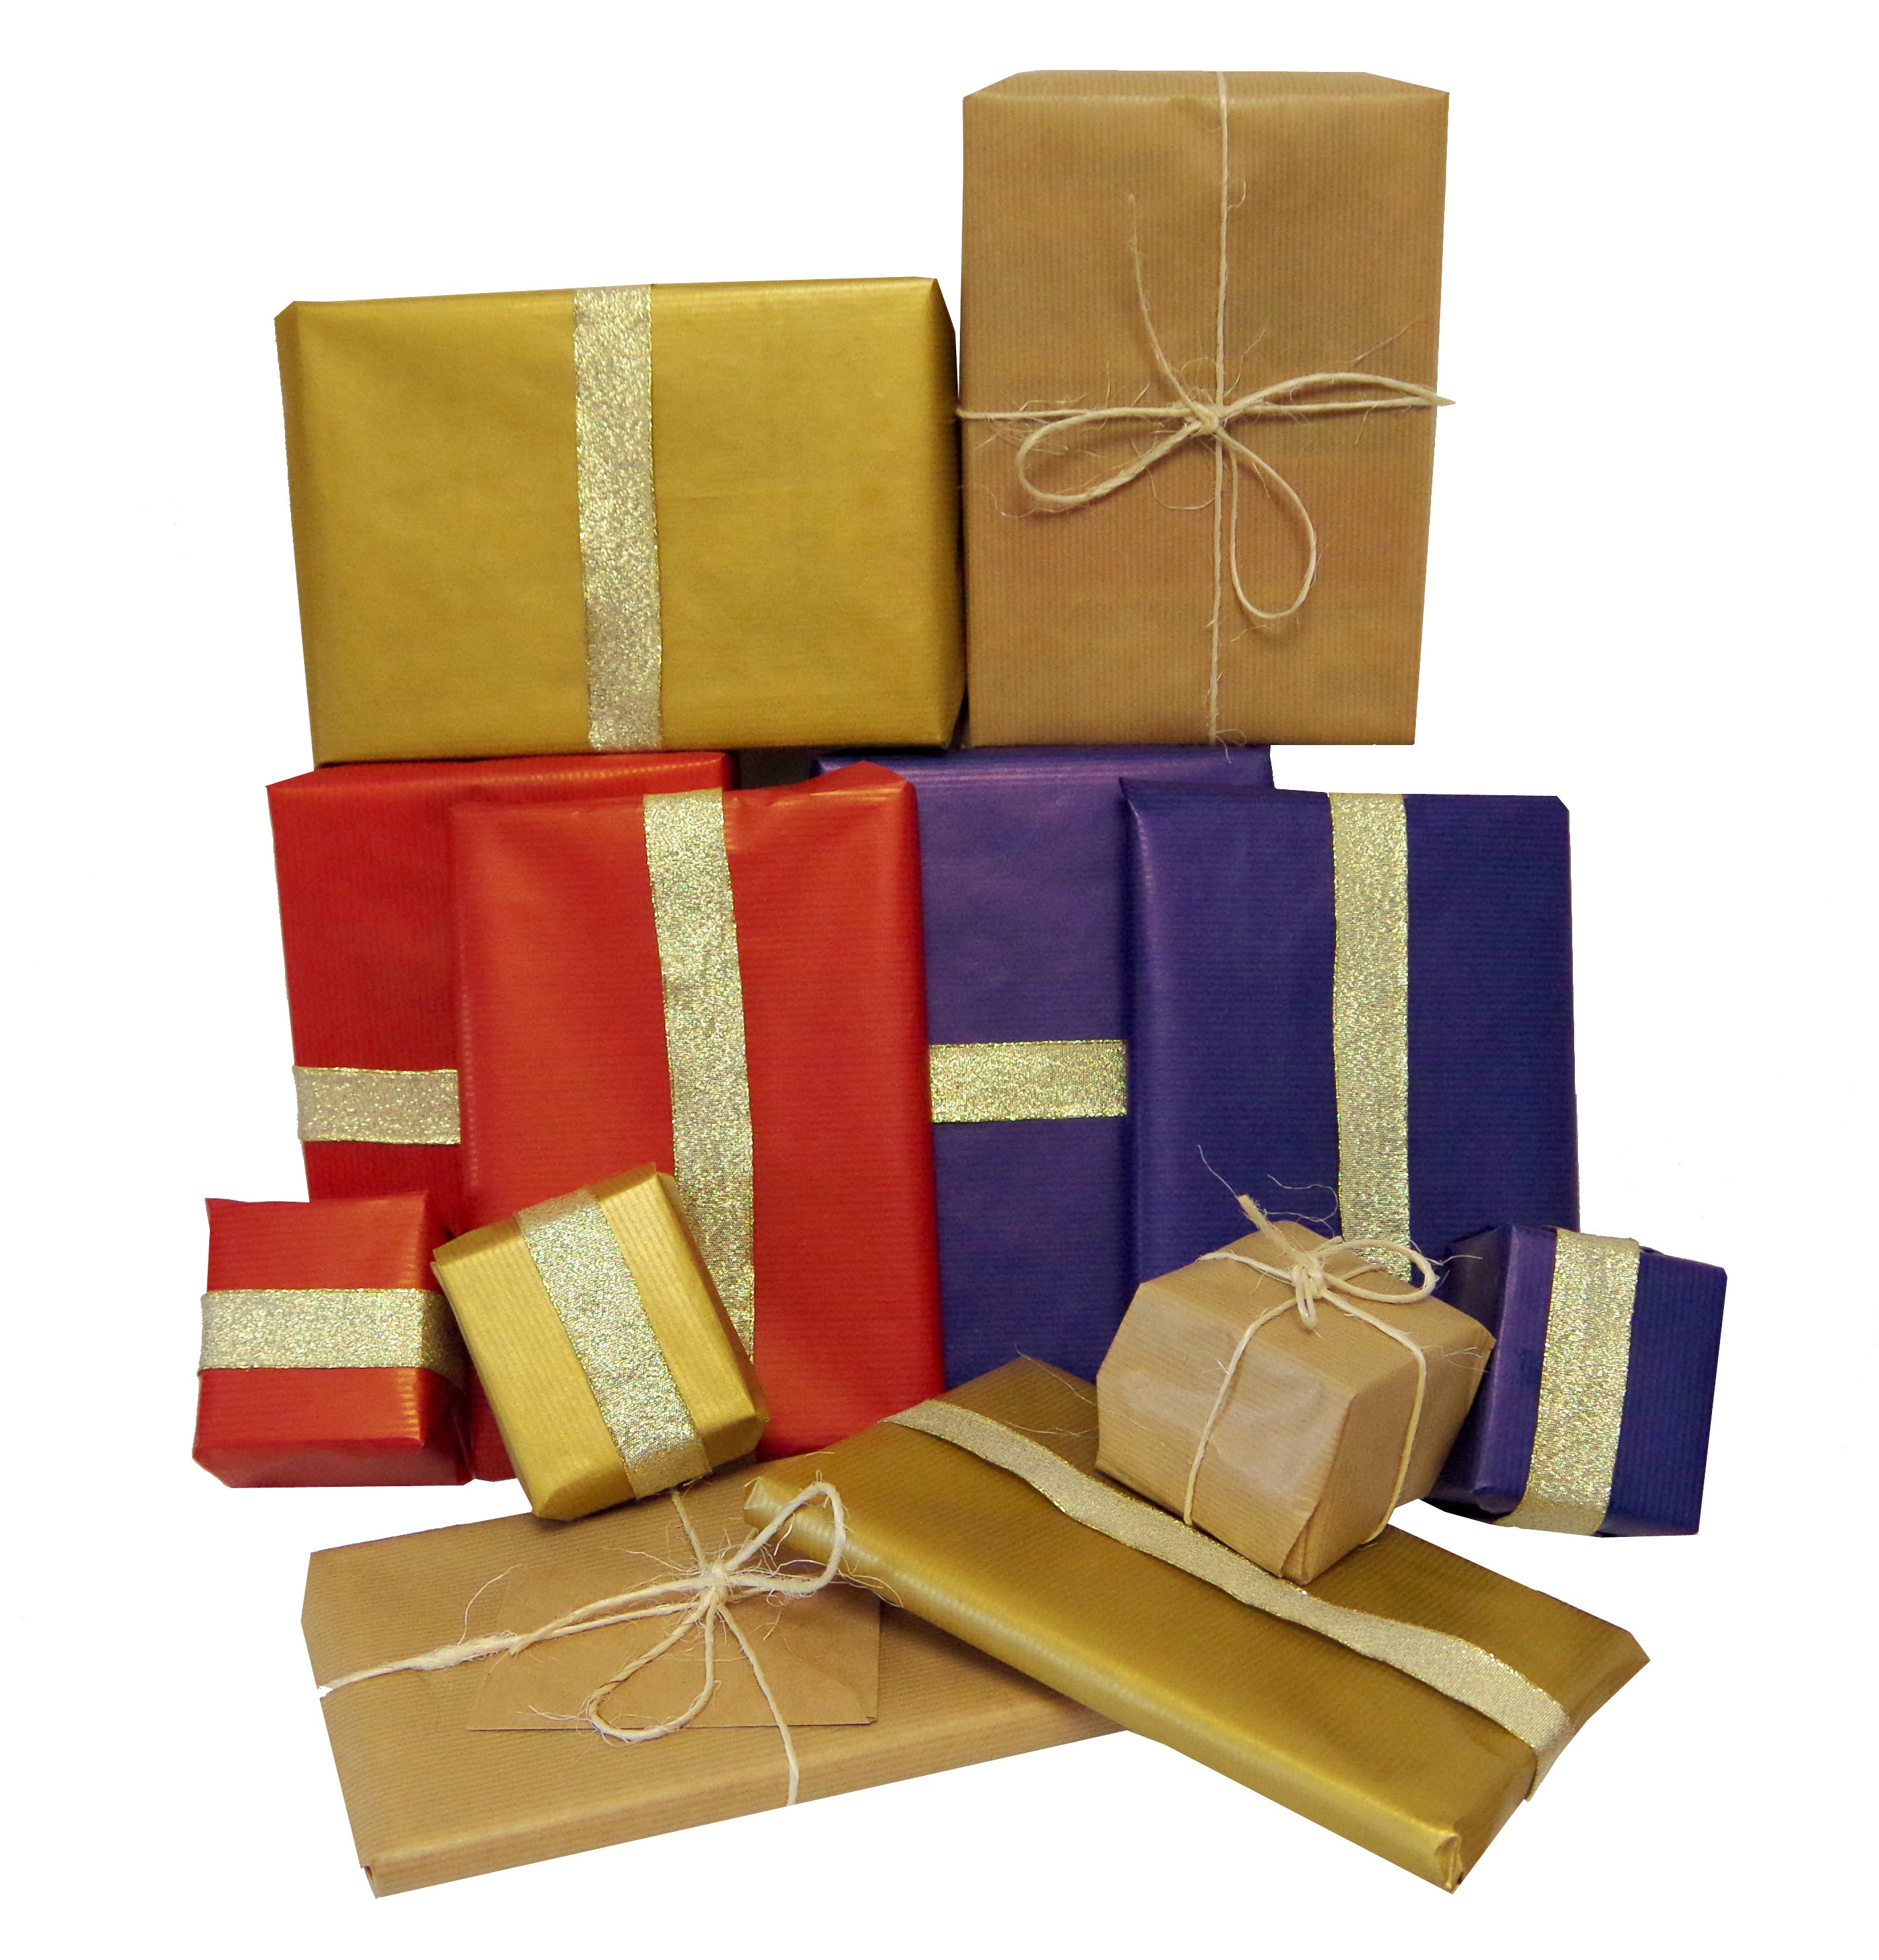 Gift Wrap - Please specify the Color (Red, Blue, Gold, Natural) and your Gift message in "Order instructions" section